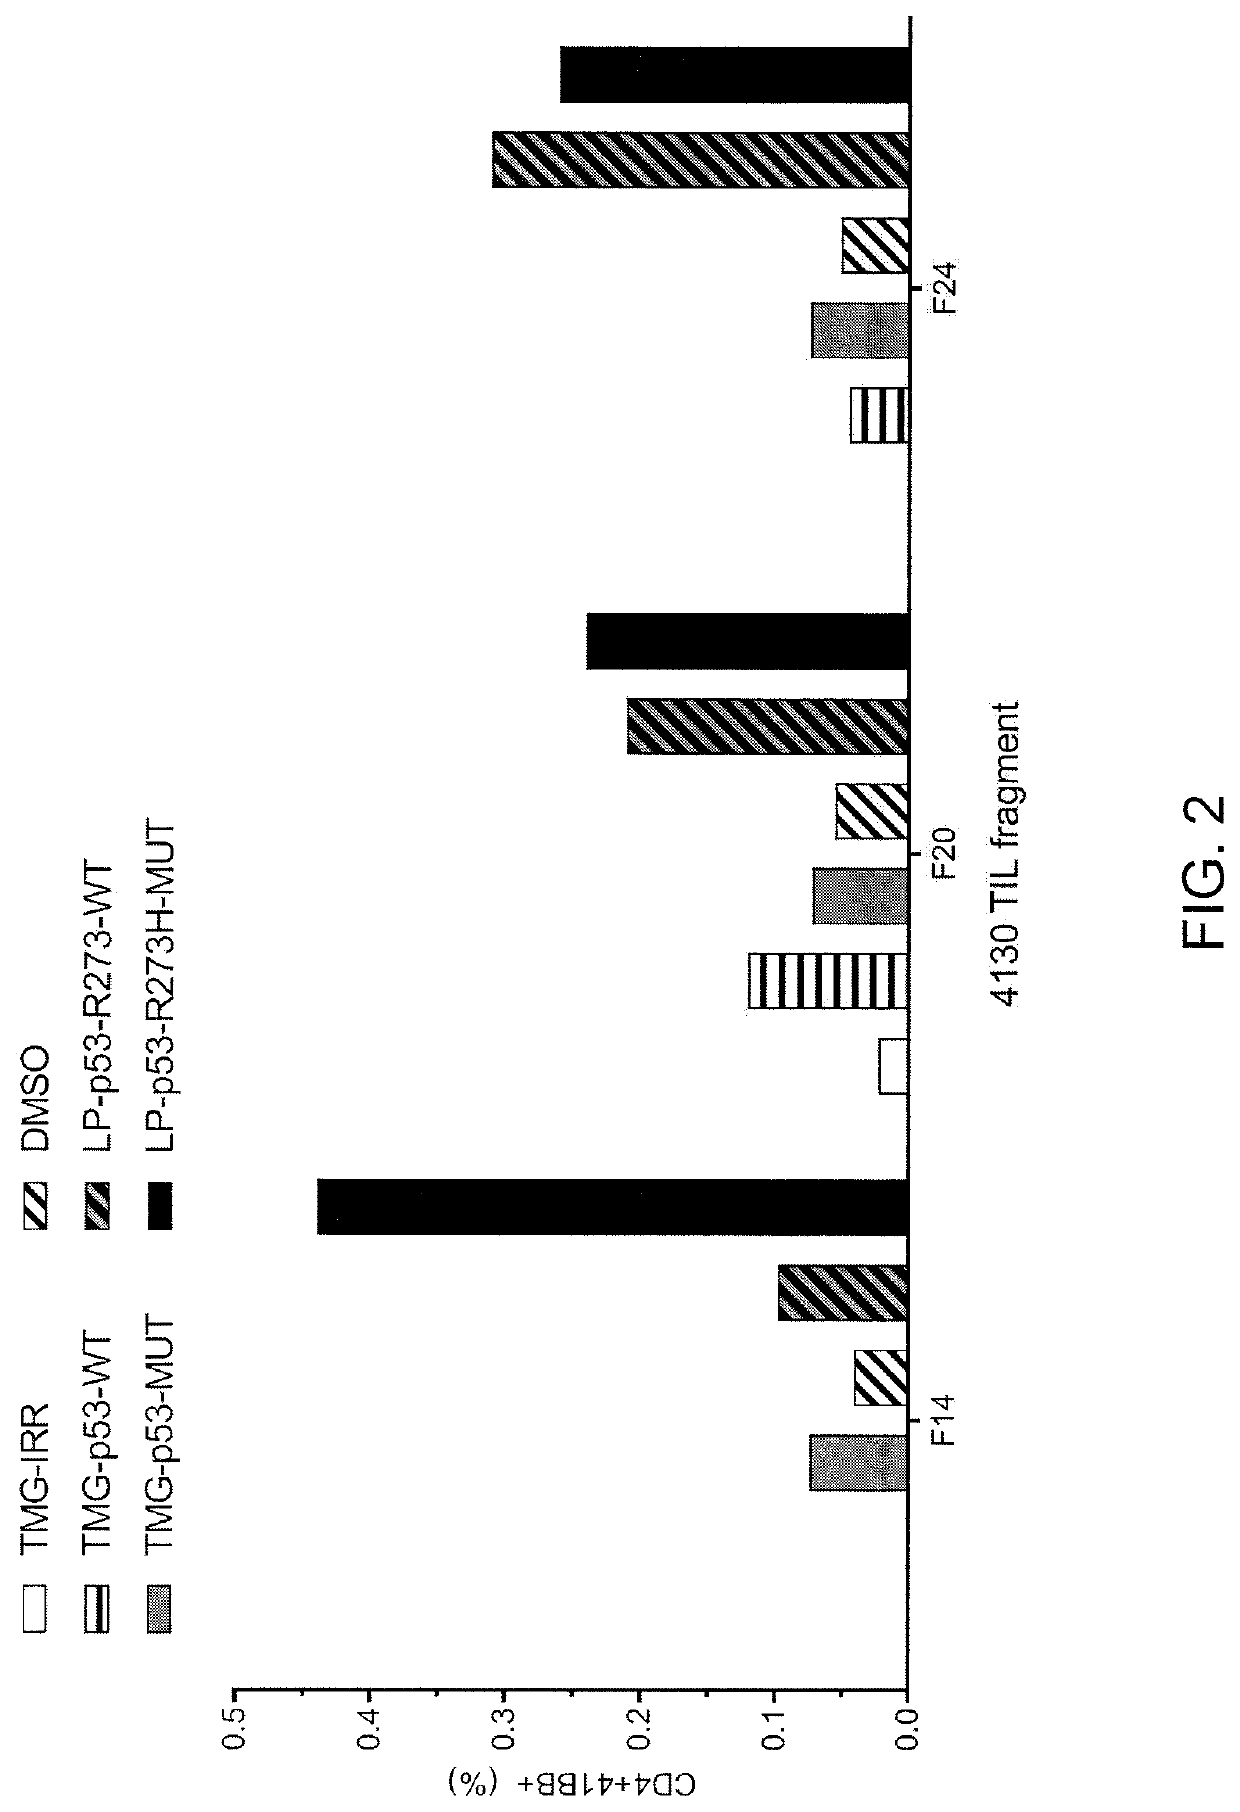 Methods of isolating t cells having antigenic specificity for a p53 cancer-specific mutation